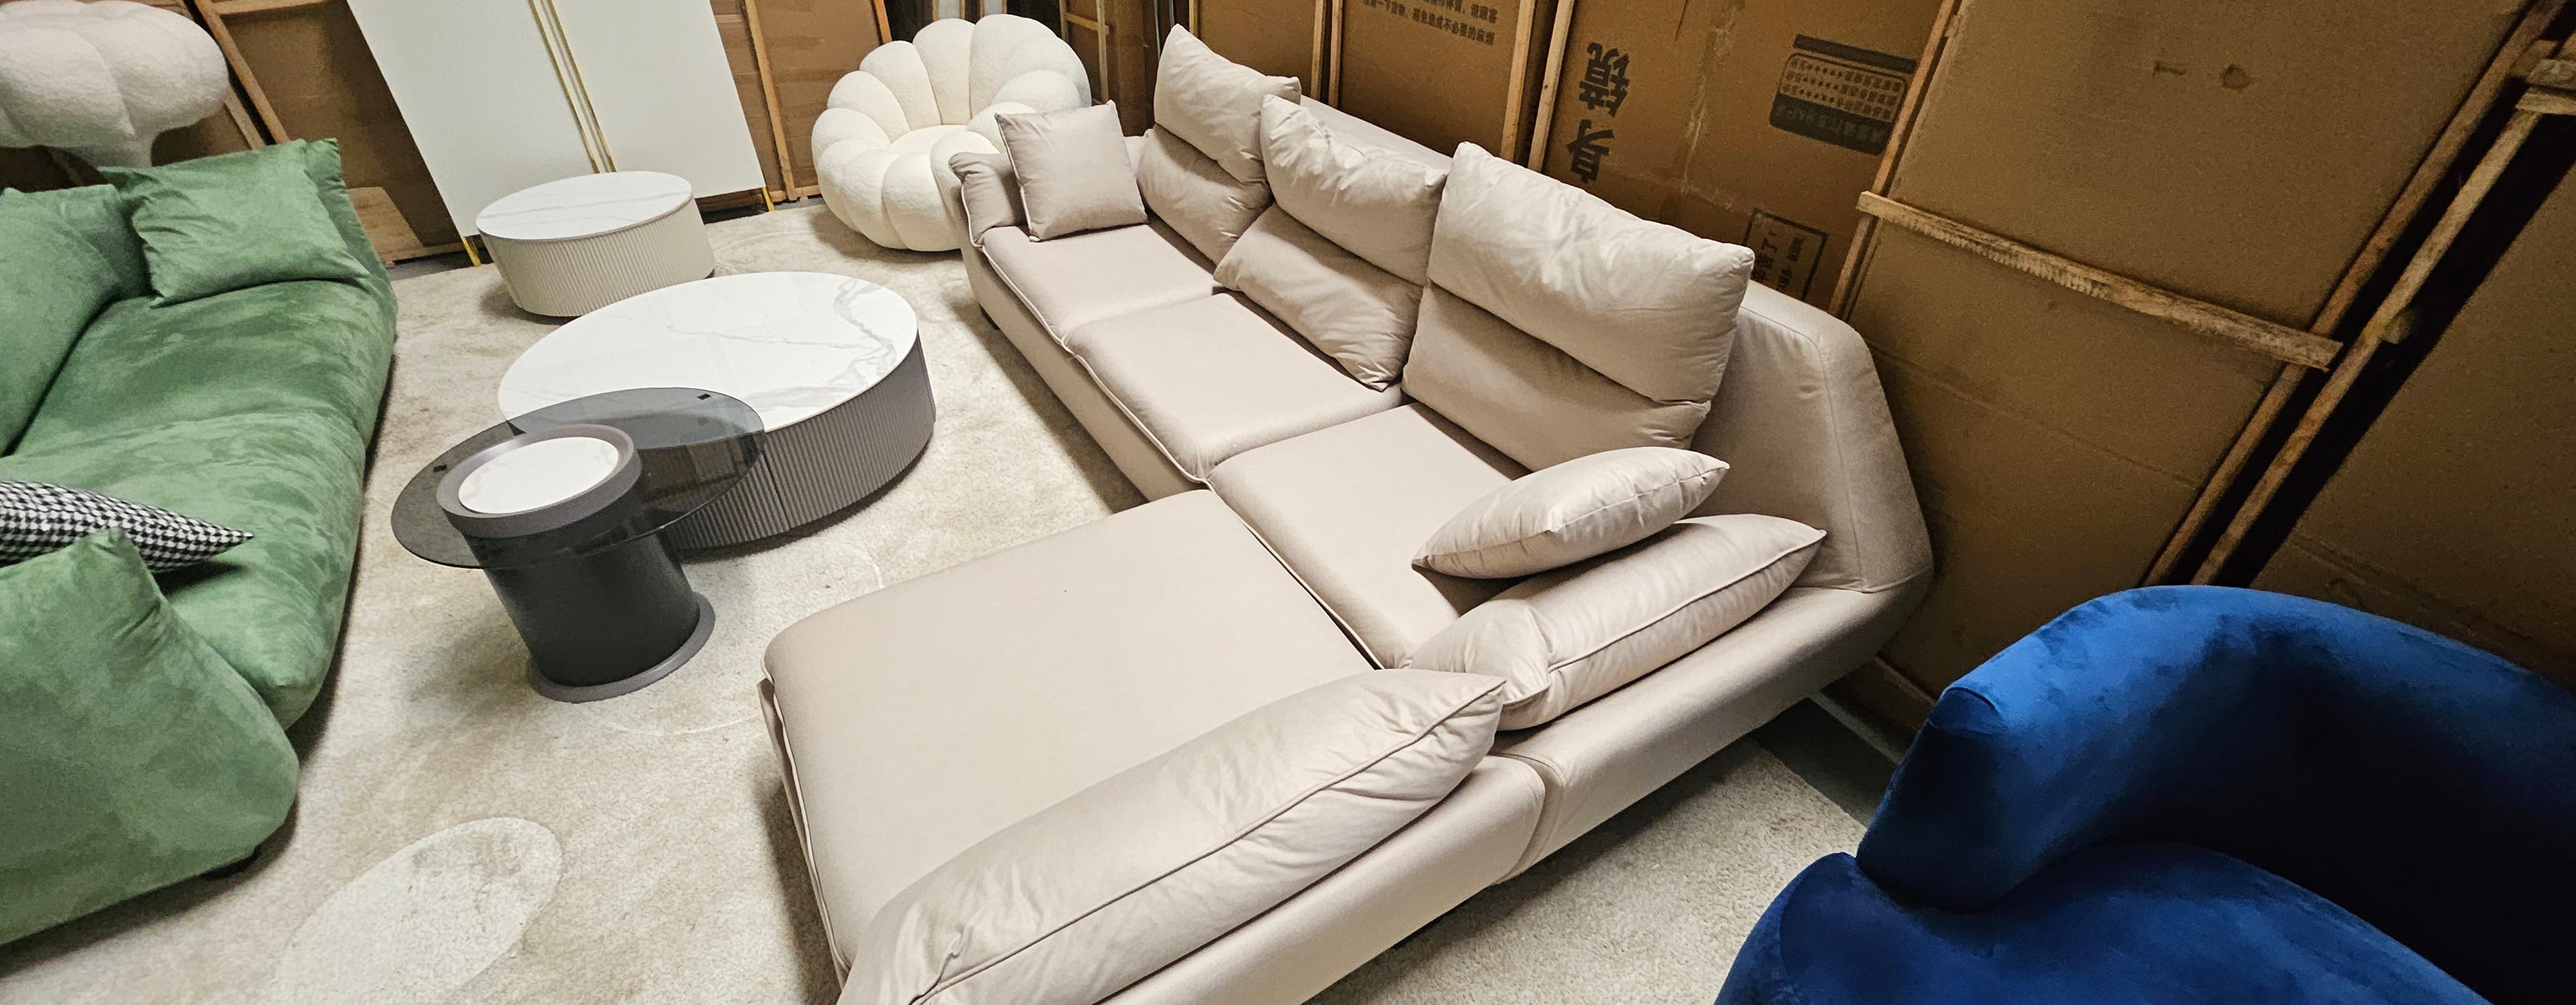 A900 Quinn Three Seater Corner Sofa, 260cm With Minor Stains & Dents For Display